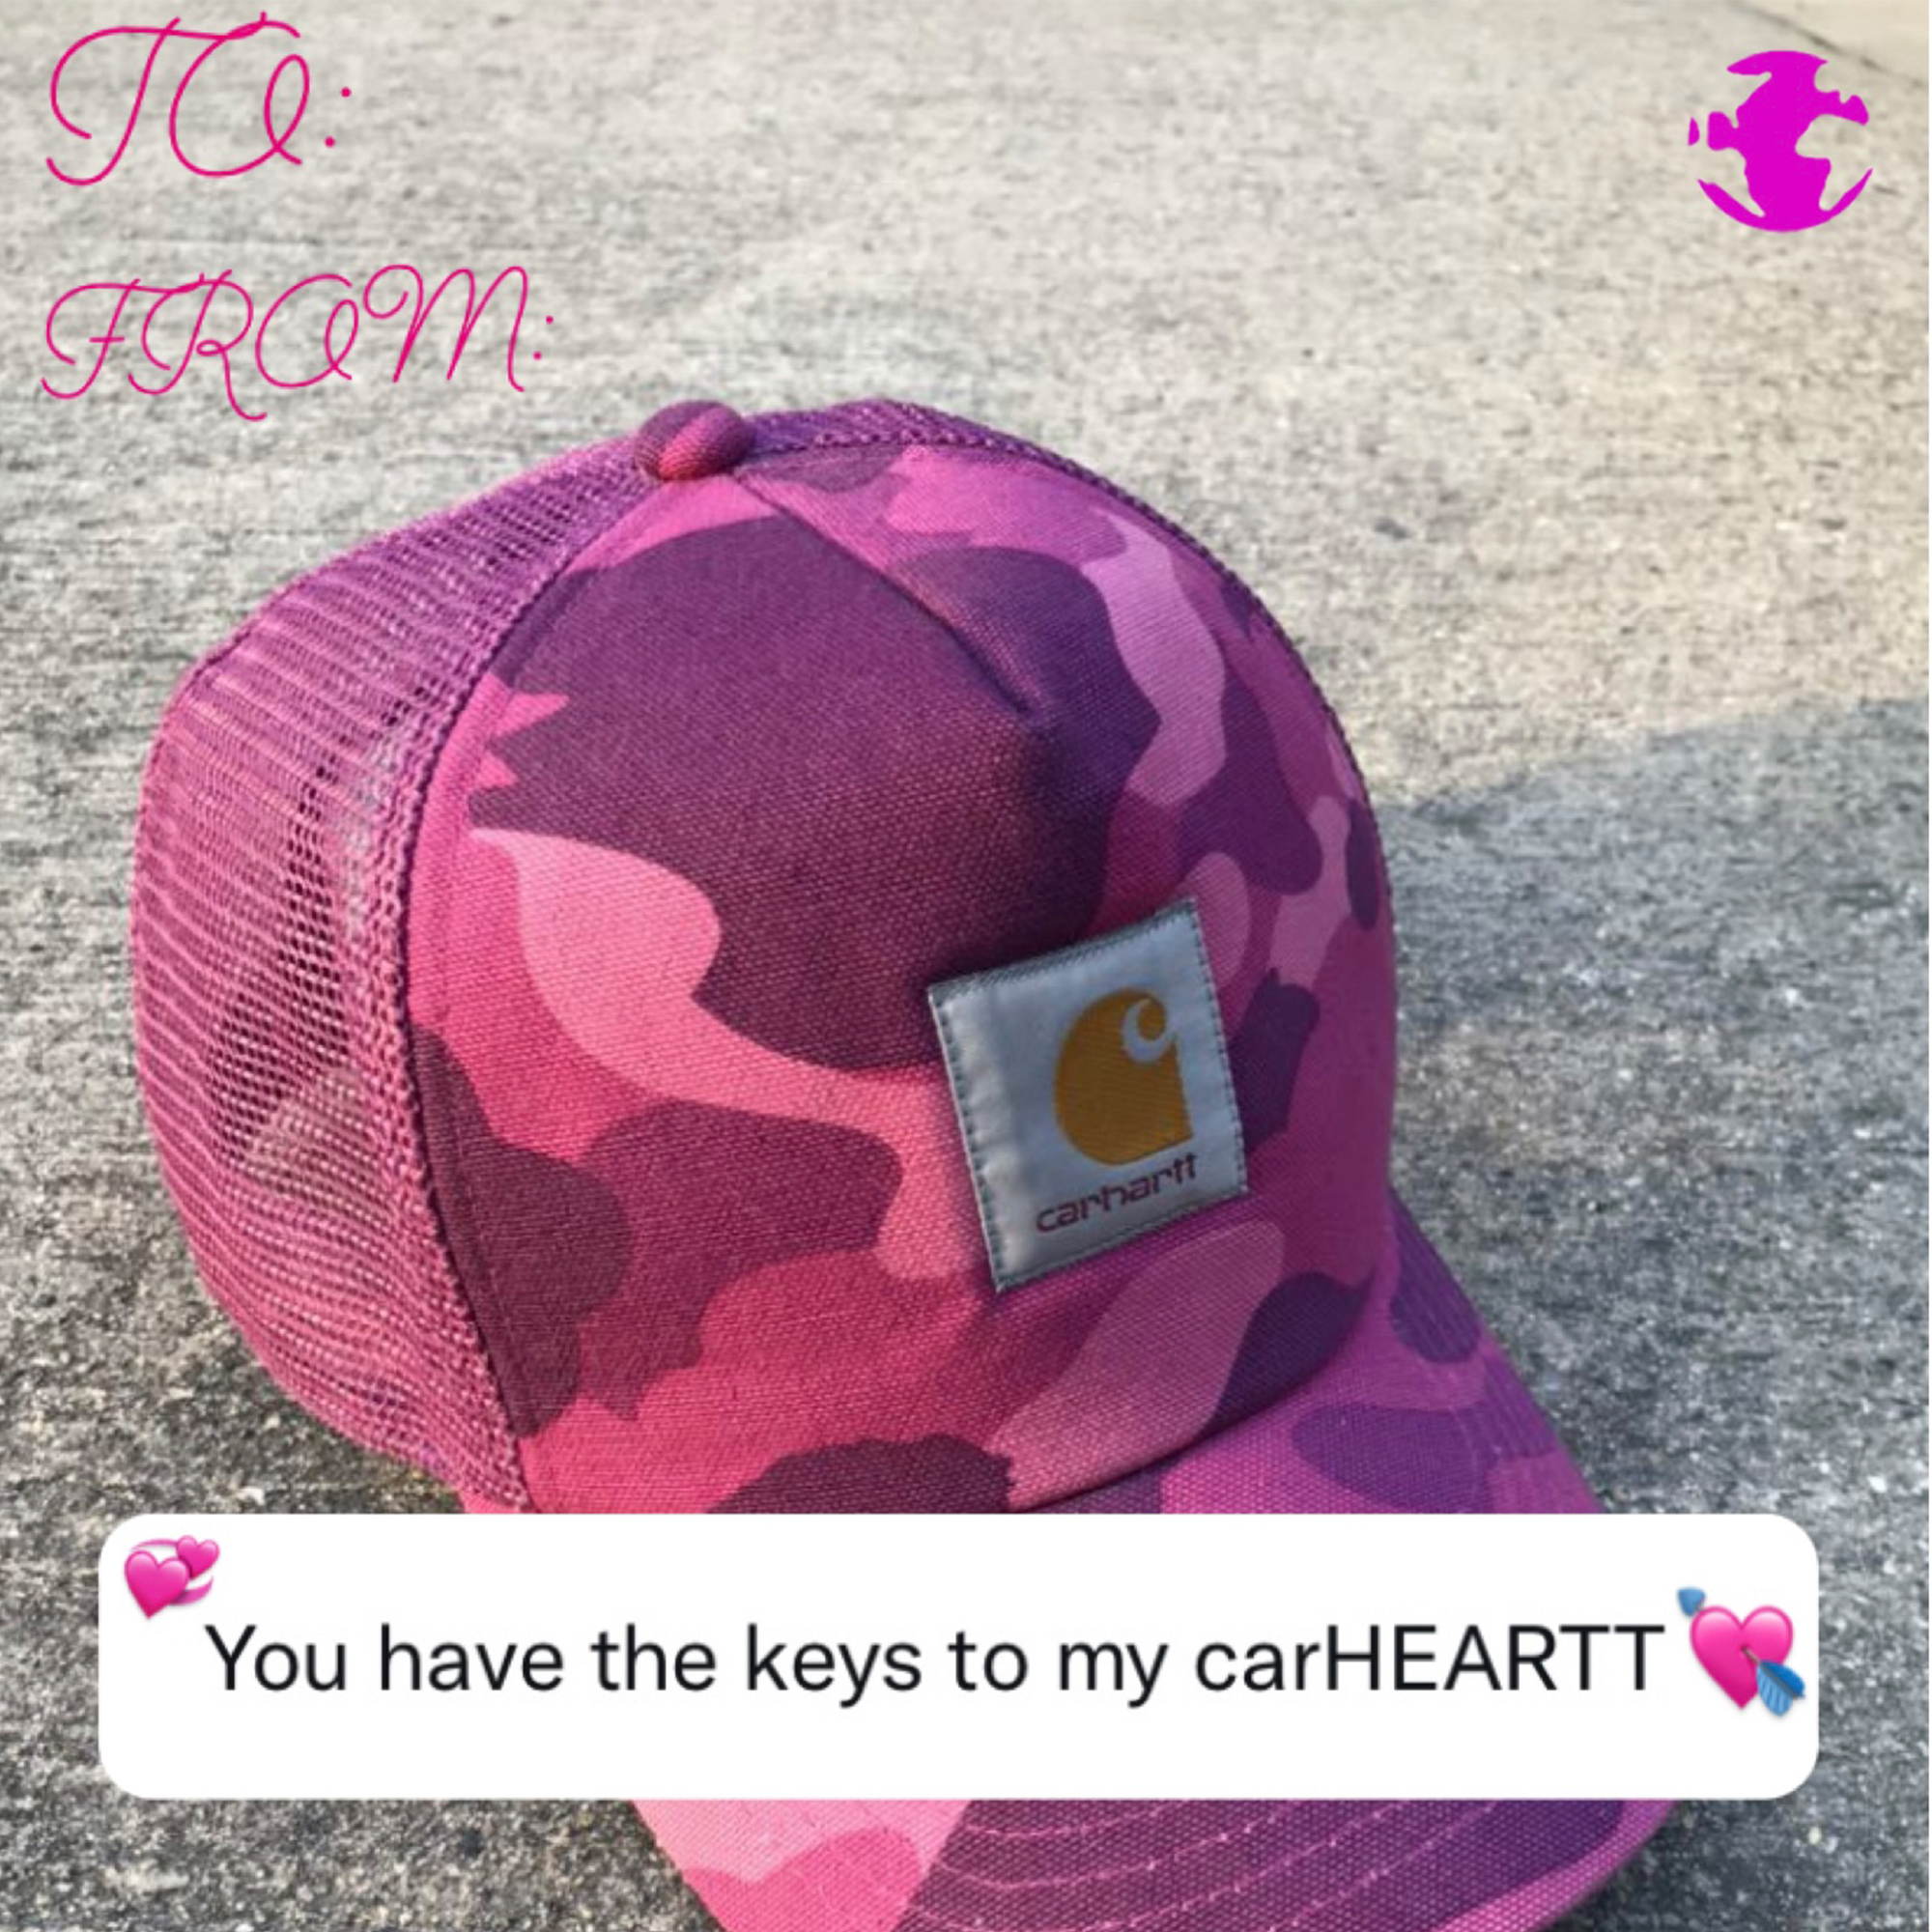 eBaum's Valentine's Day Cards 2022 - baseball cap - Tc From cartar You have the keys to my carHEARTT